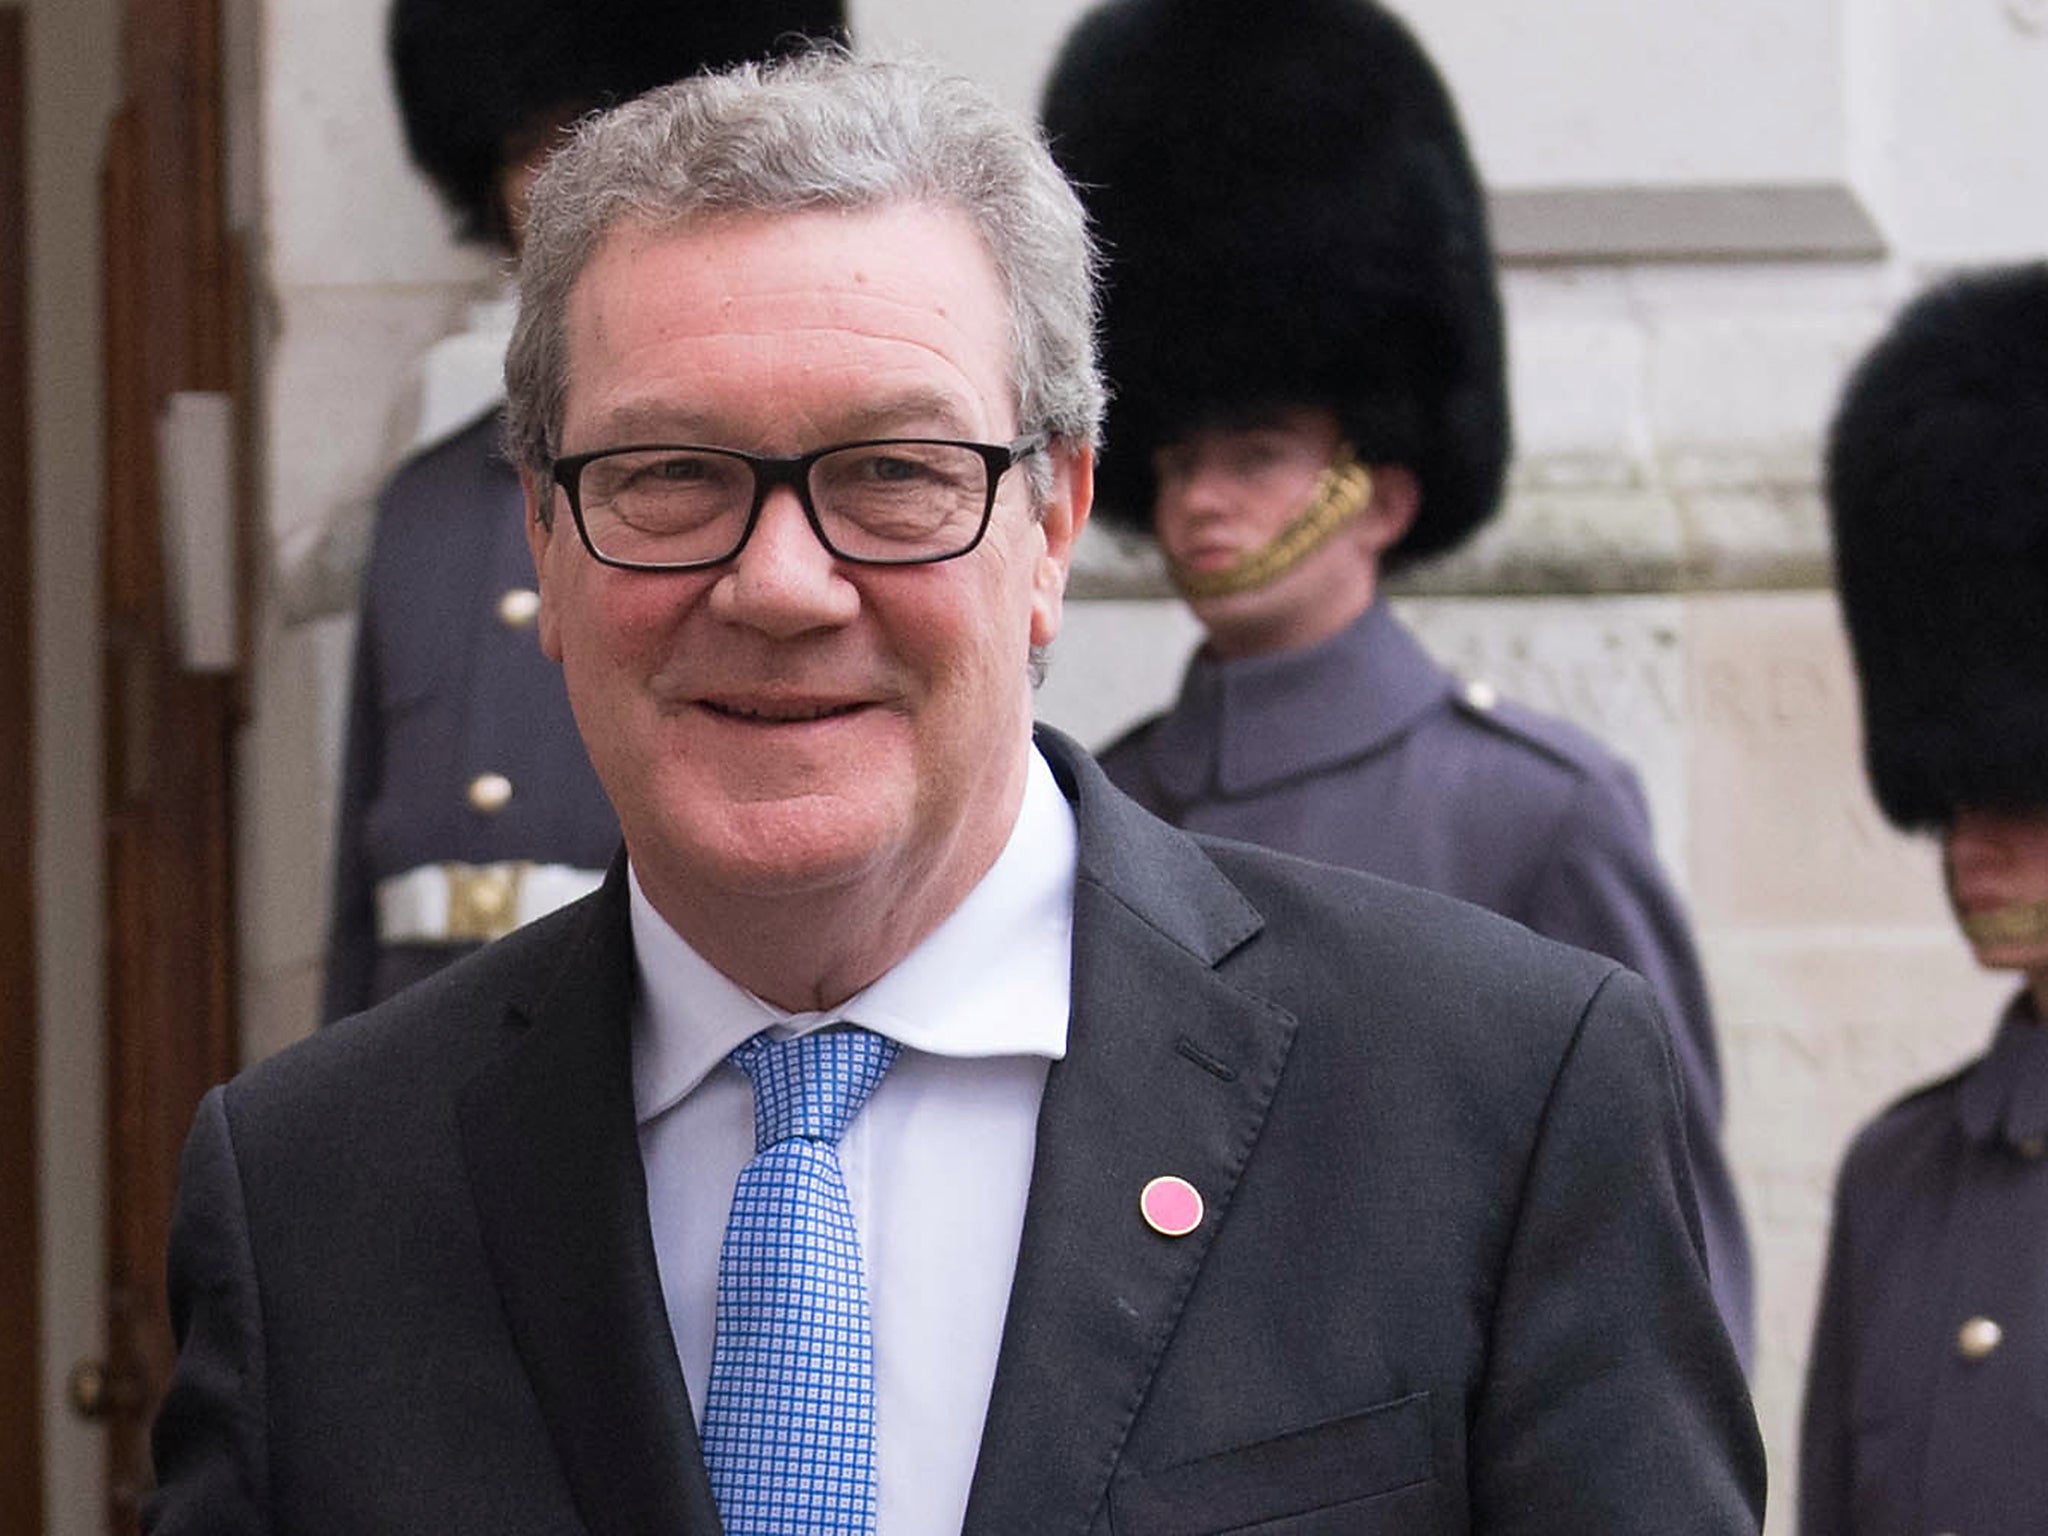 Alexander Downer was formerly the Australian high commissioner to the UK